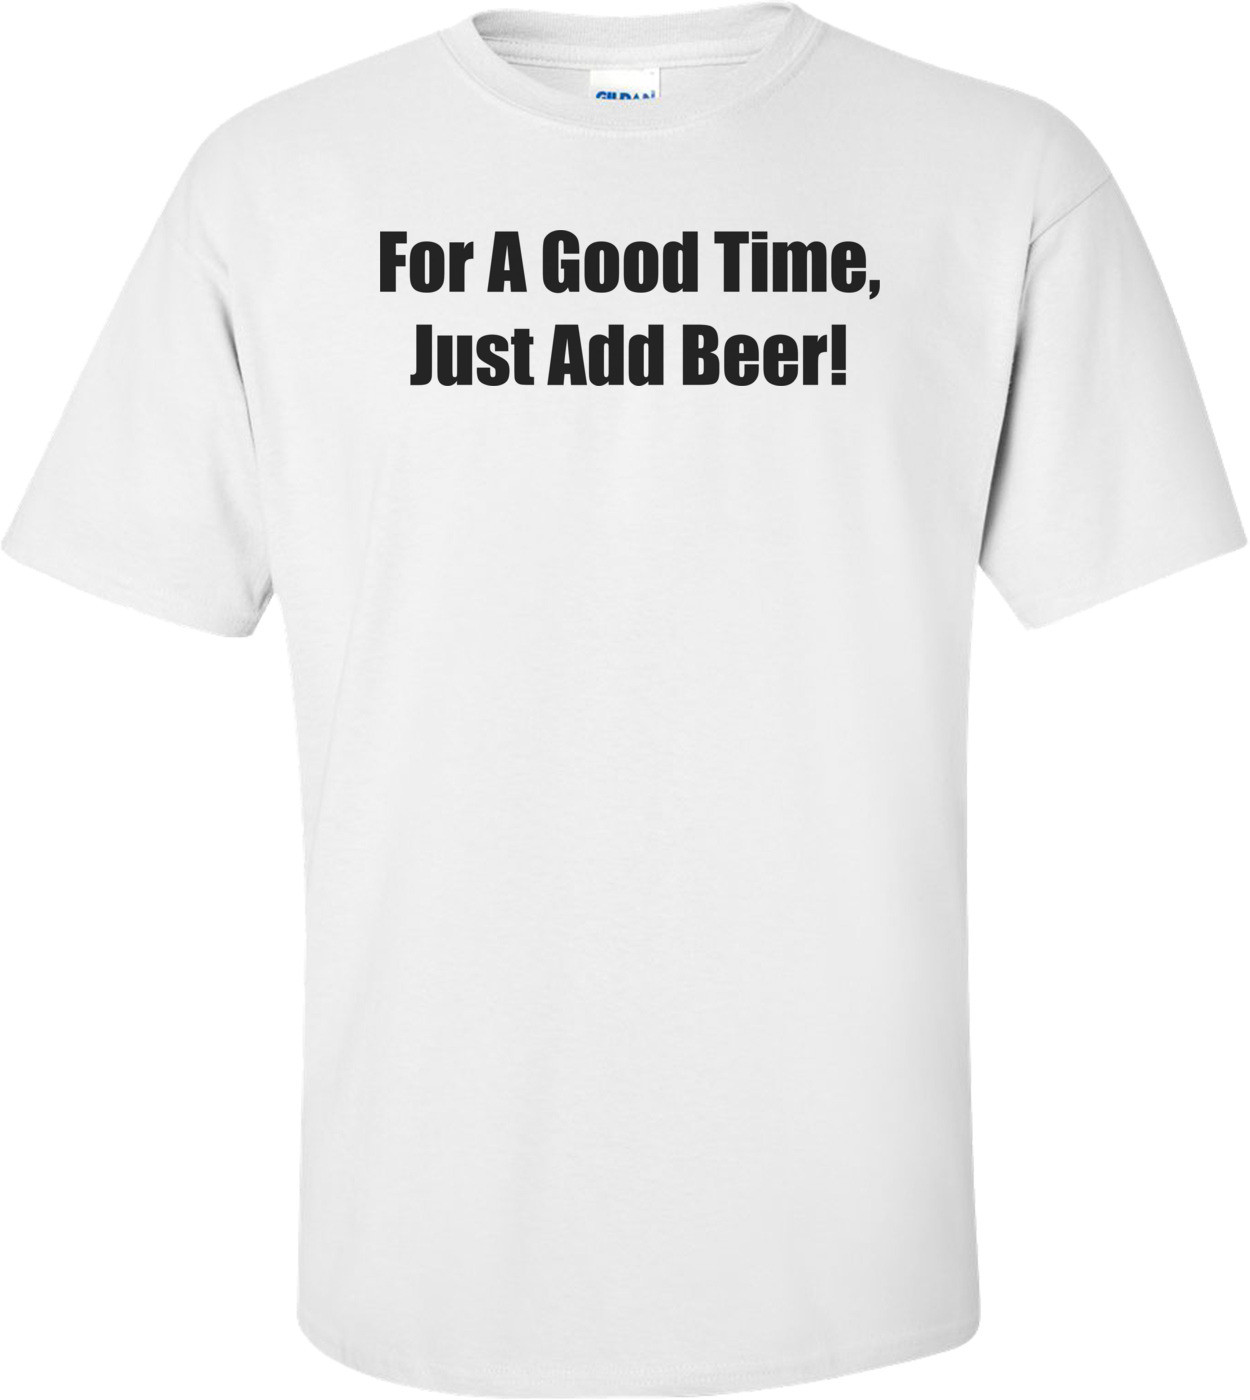 For A Good Time, Just Add Beer!